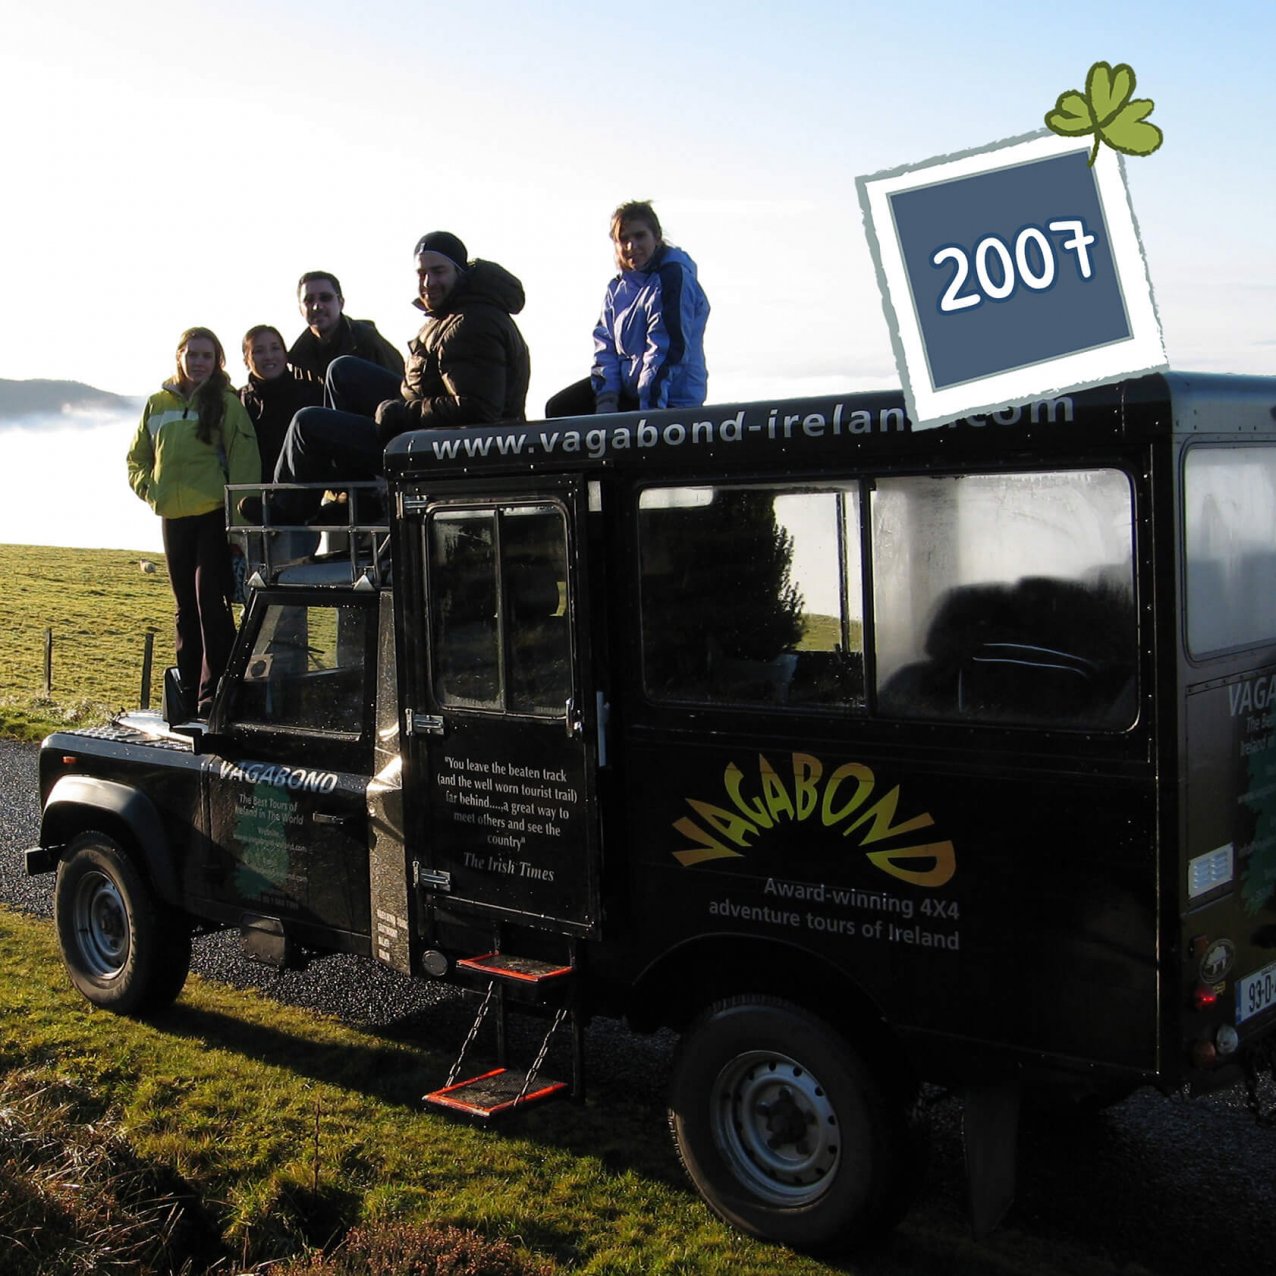 Vagabond Tours guest group sitting and standing on an original Land Rover Defender VagaTron tour vehicle with a 2007 date graphic in the top right corner